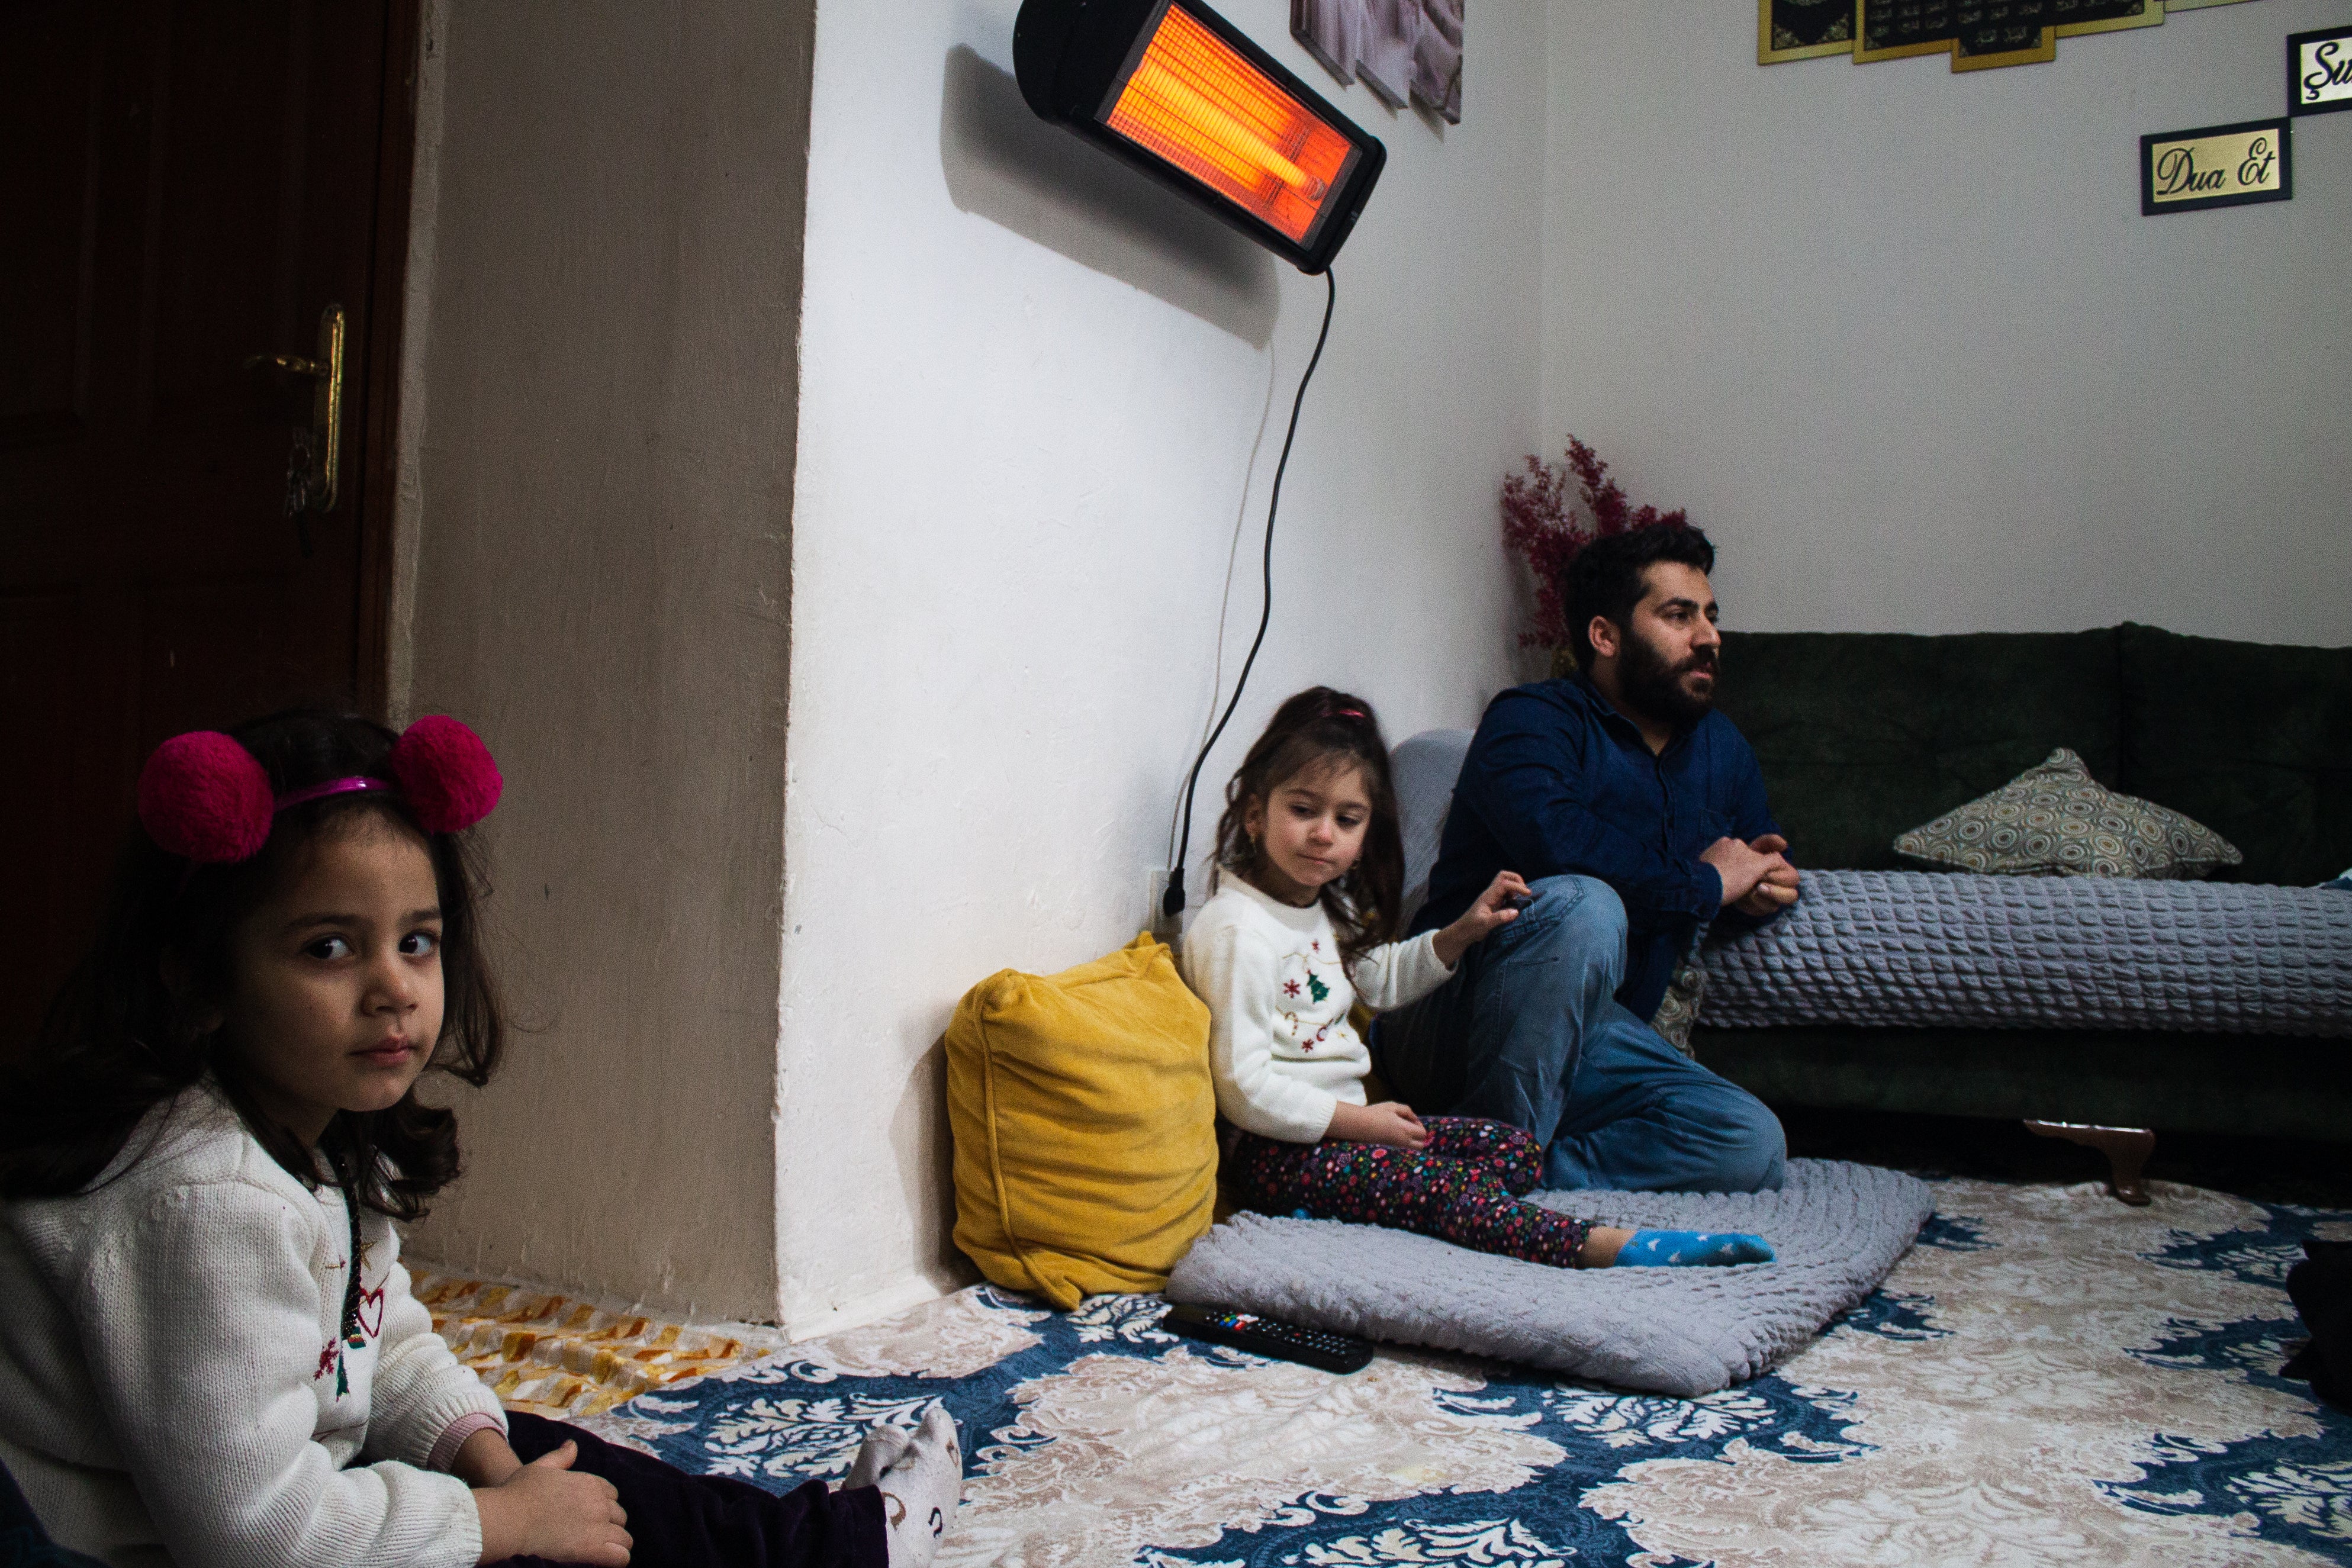 Mevlut Tekin sits with his two daughters in their rented apartment in Istanbul